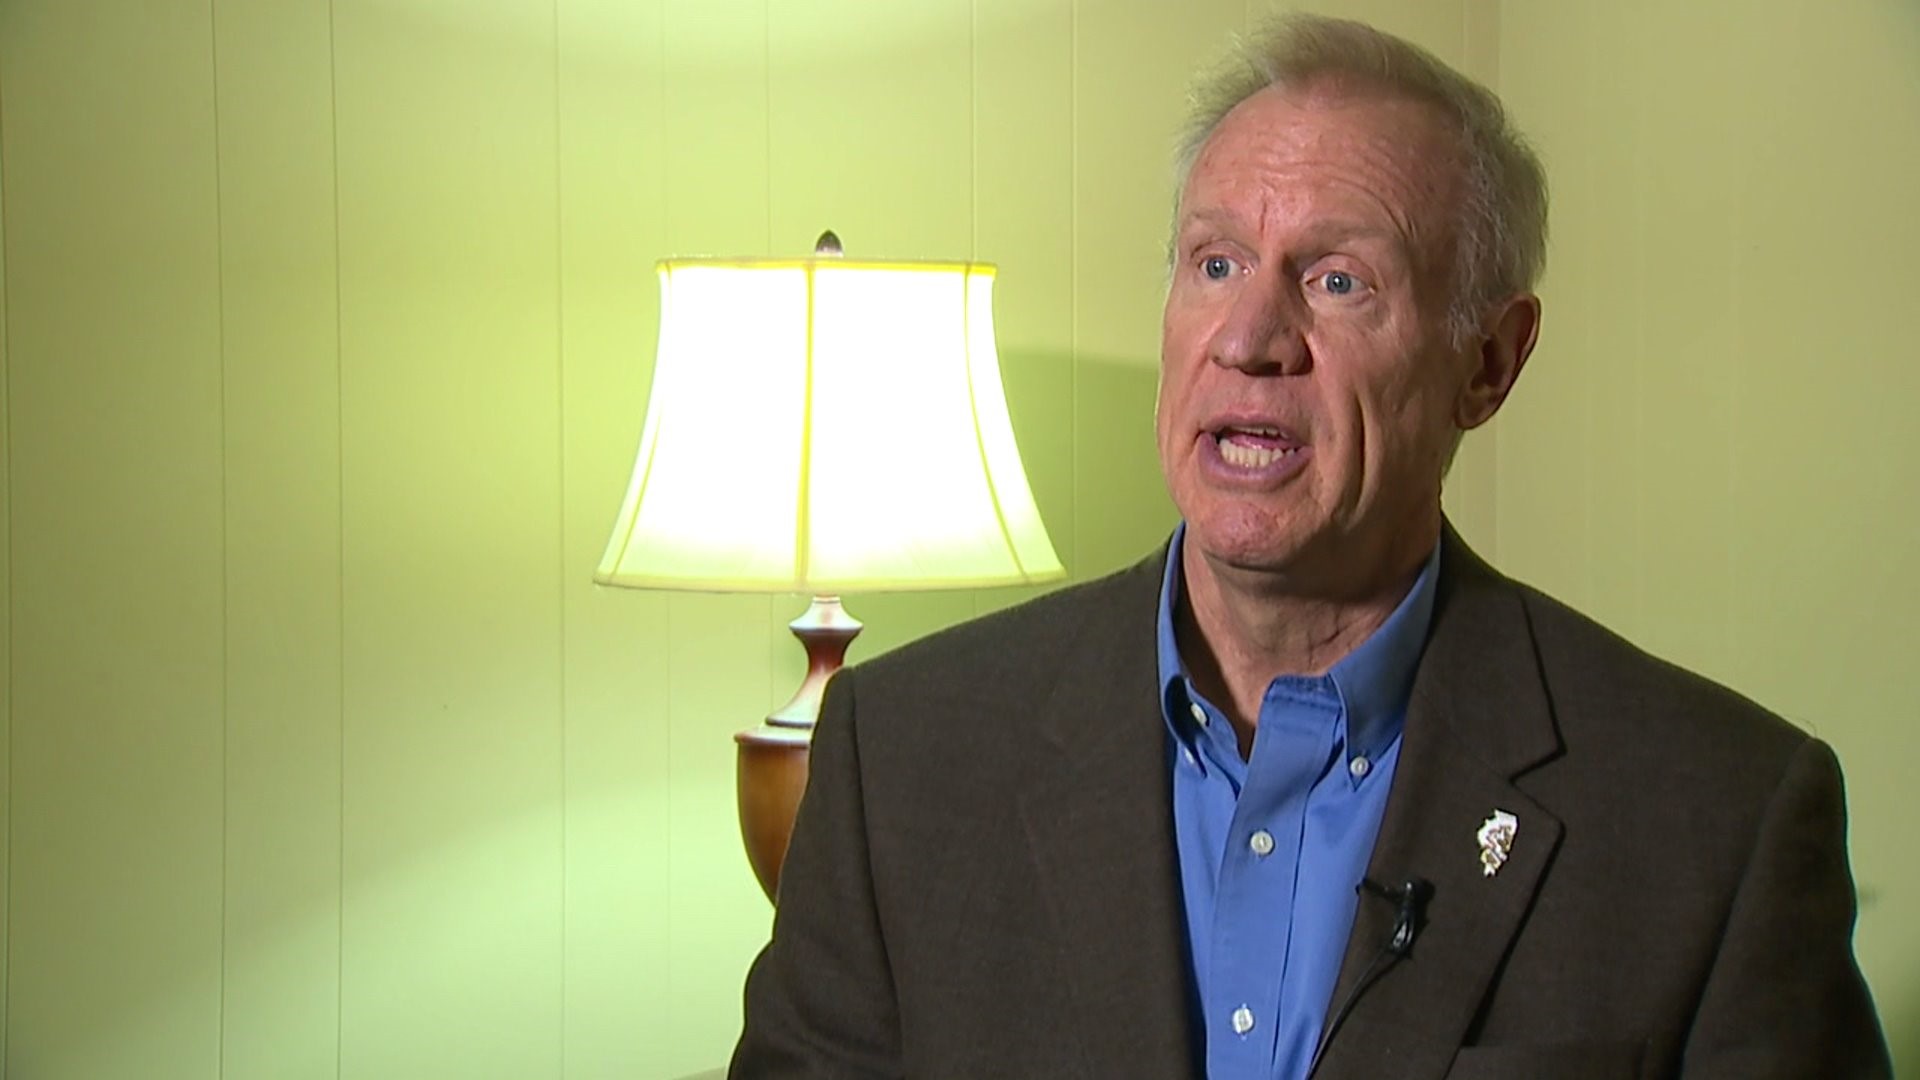 BREAKFAST WITH... Gov. Bruce Rauner on His Pledge to the Quad Cities